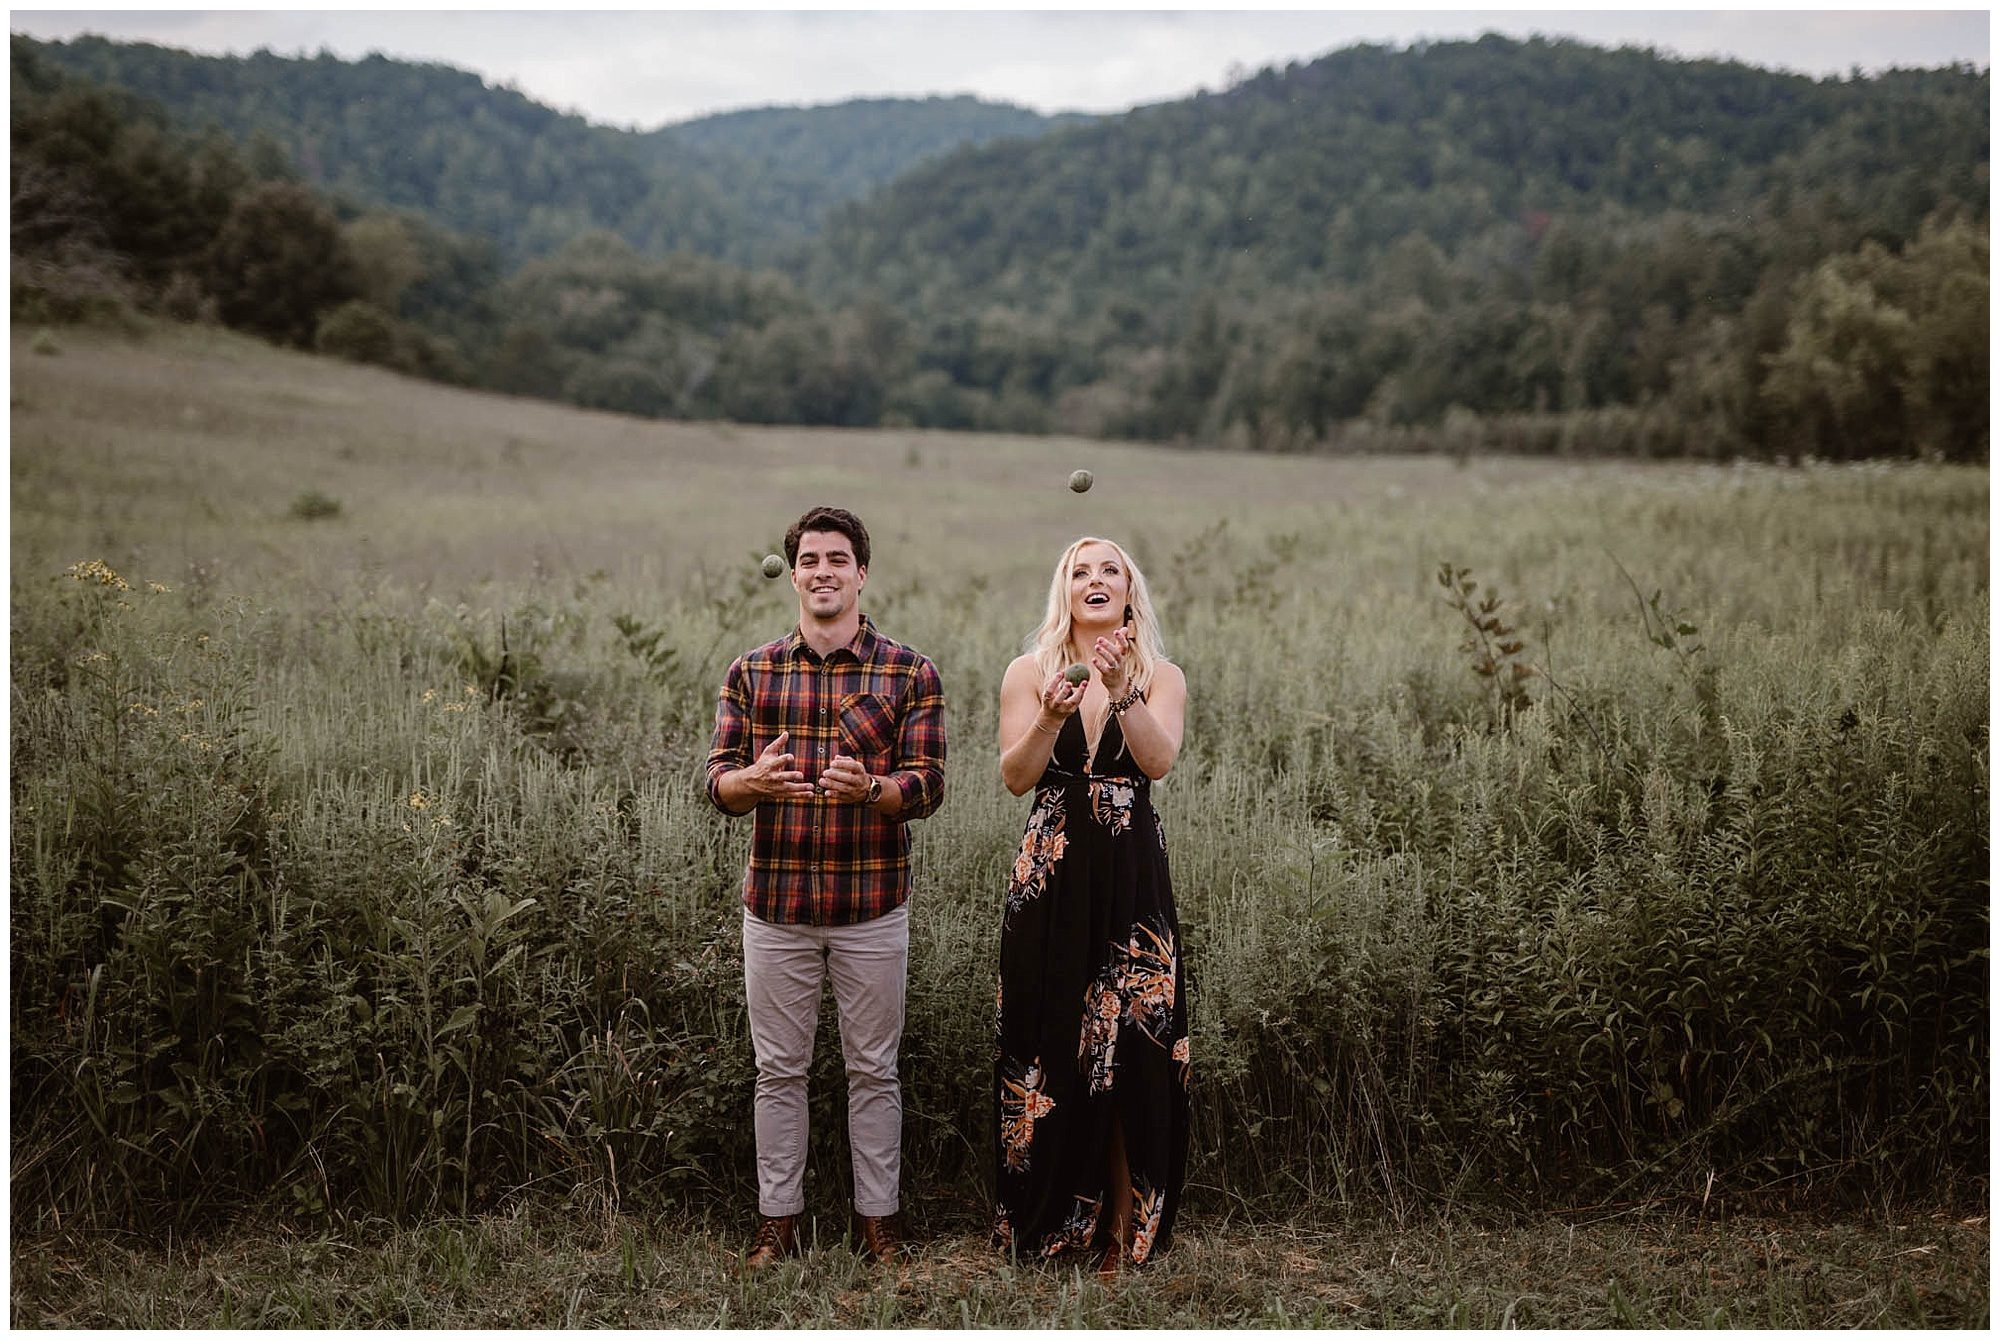 Adventure Session in Cades Cove in the Great Smoky Mountains